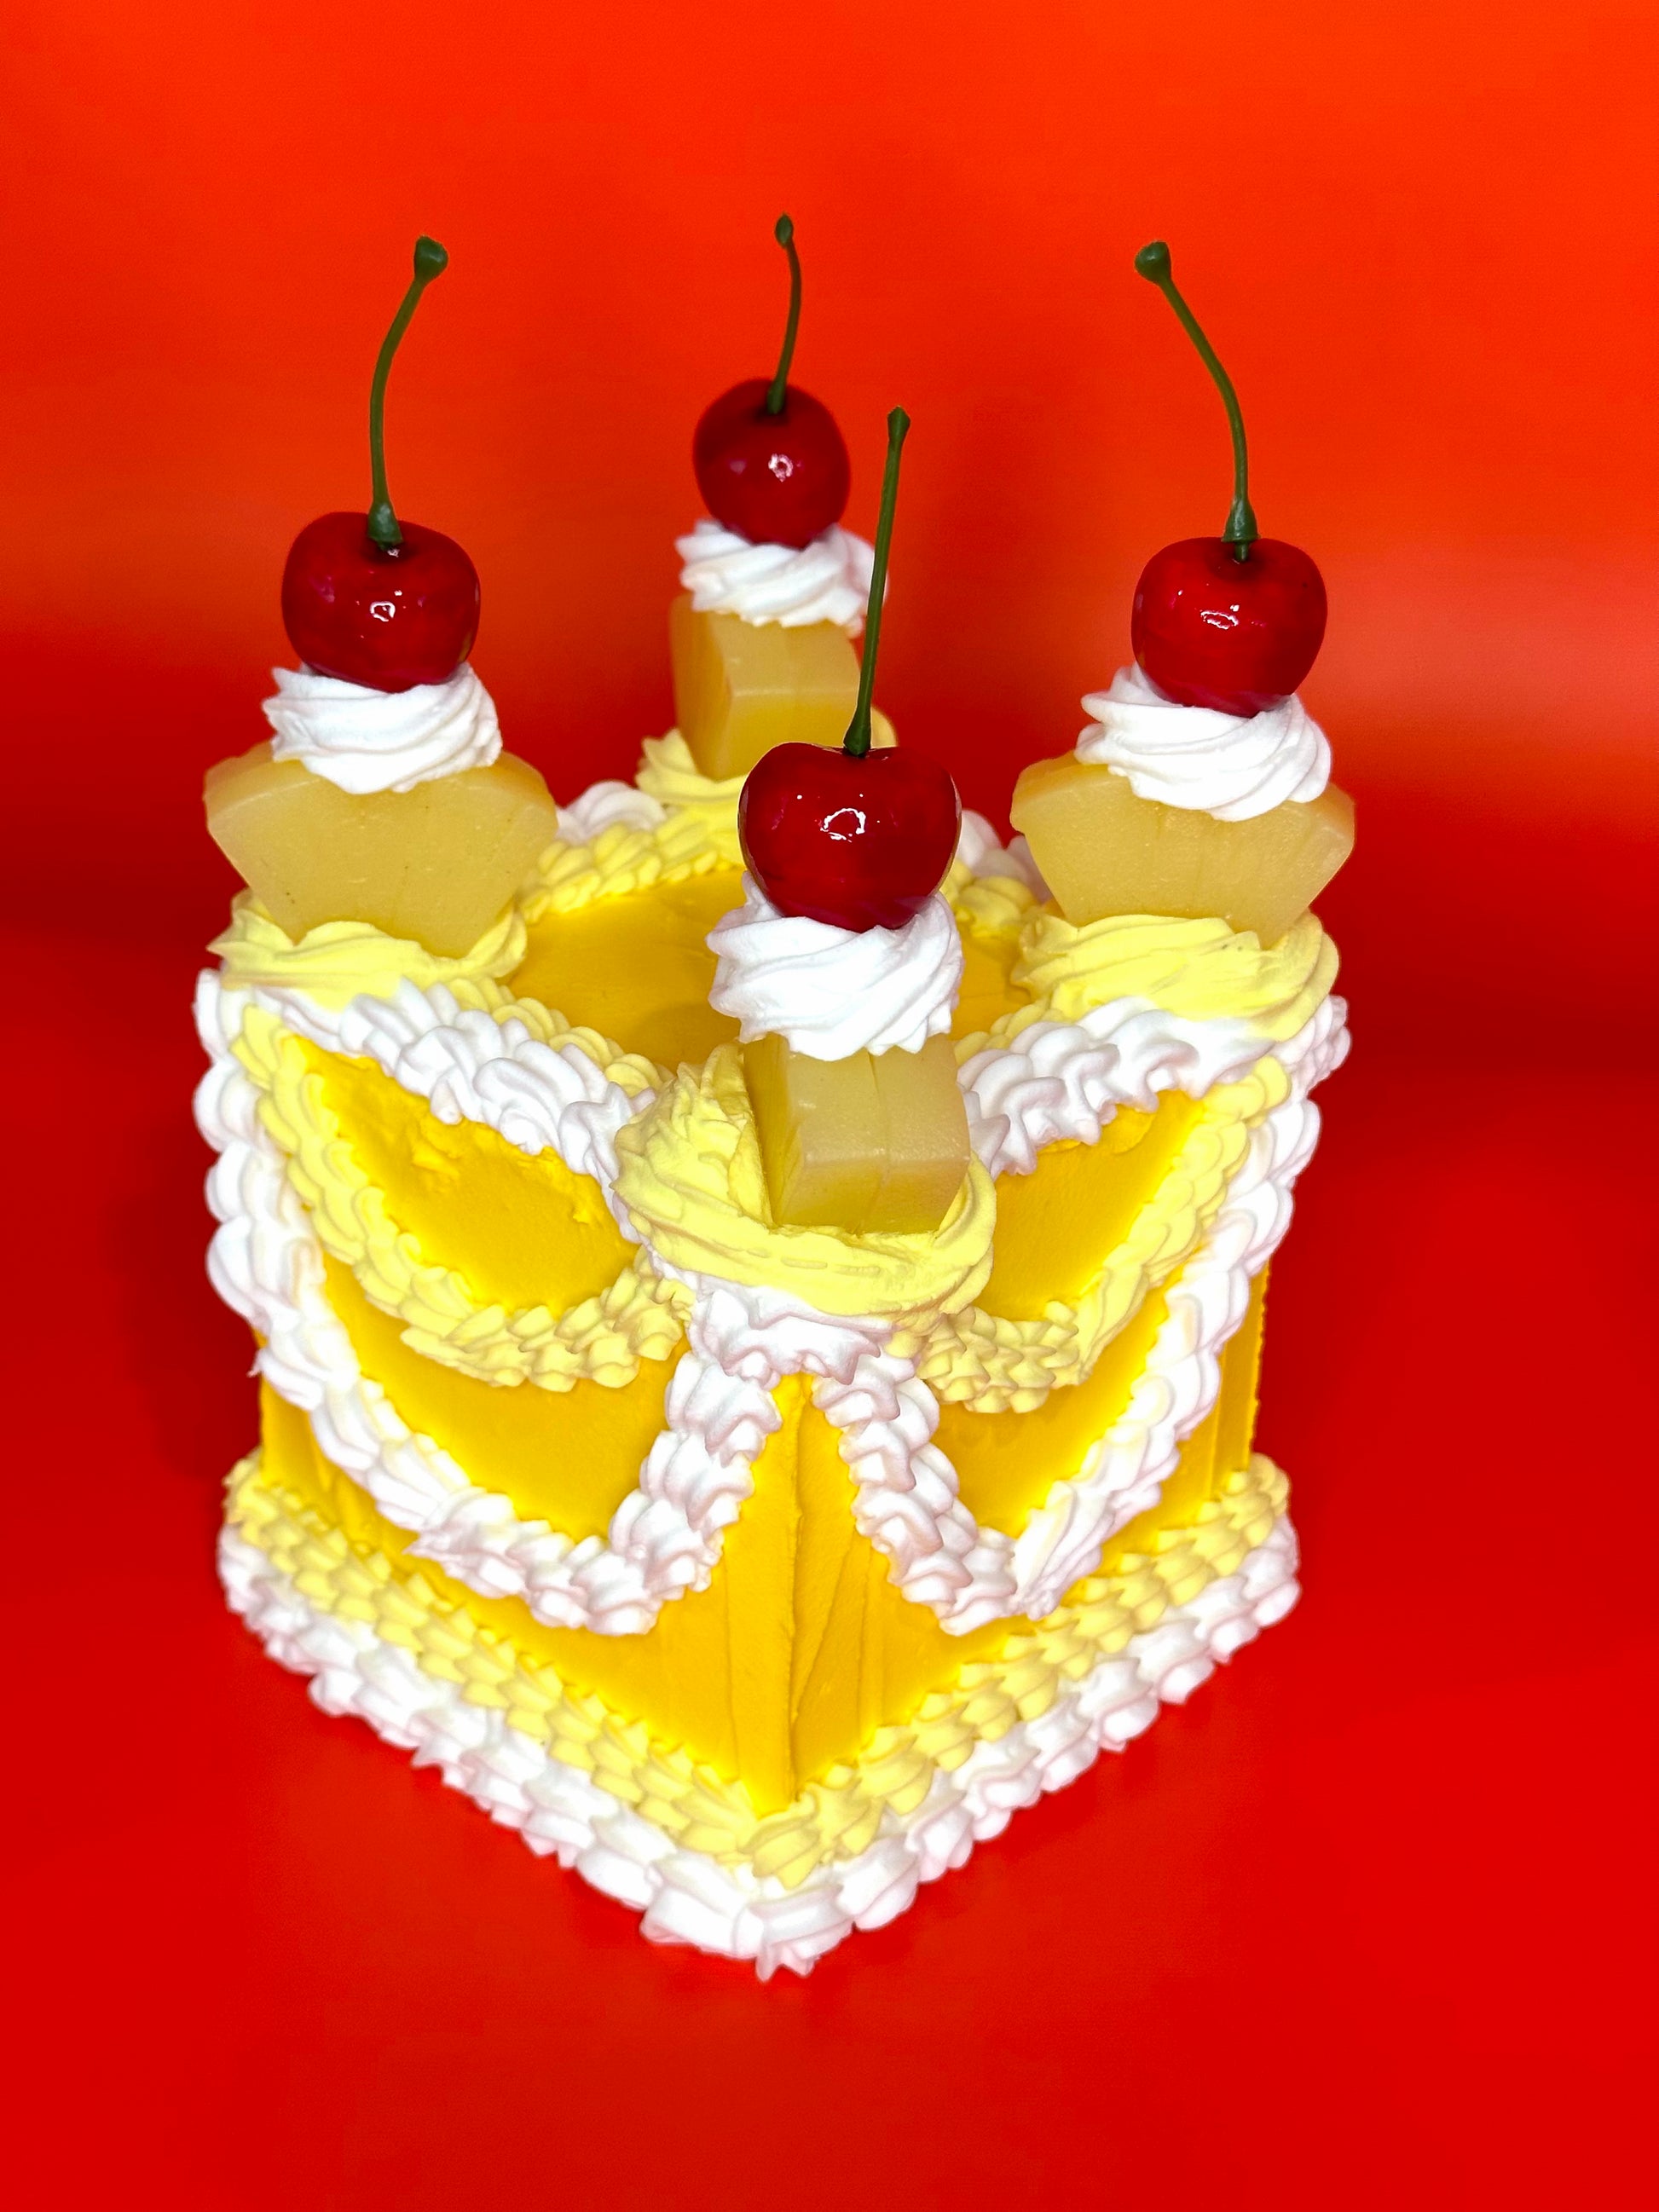 Vintage Yellow Square Cake with Pineapples and Cherries